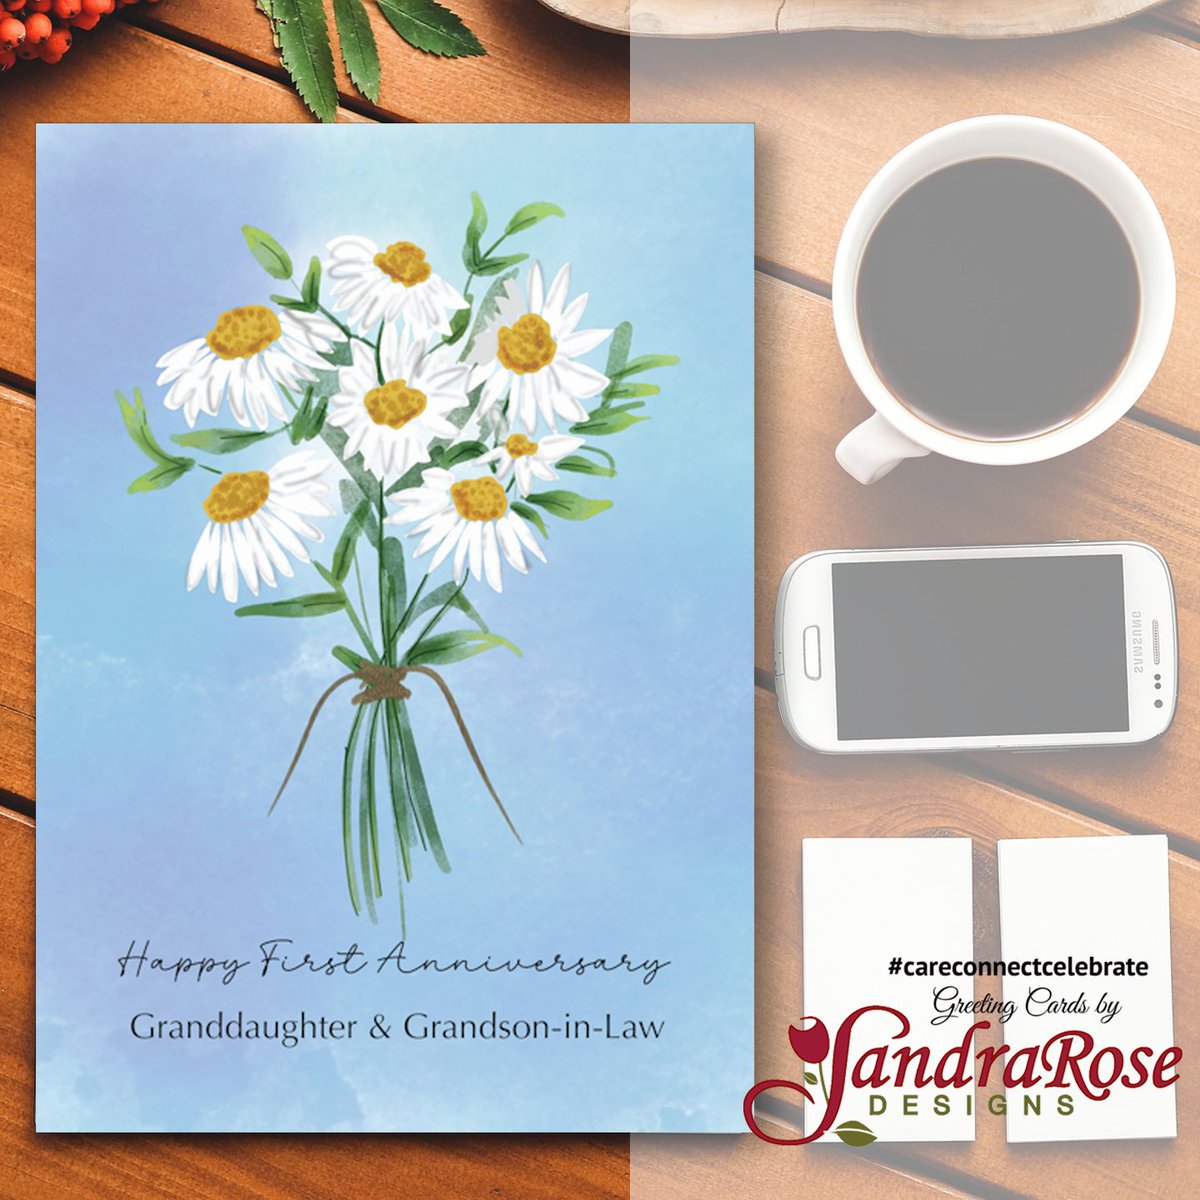 Celebrate the love that continues to blossom with our First Wedding Anniversary card for your cherished granddaughter and grandson-in-law. #CareConnectCelebrate #SandraRoseDesigns @GCUniverse #Greetingcards #Greetingcard #anniversary #first greetingcarduniverse.com/anniversary-we…